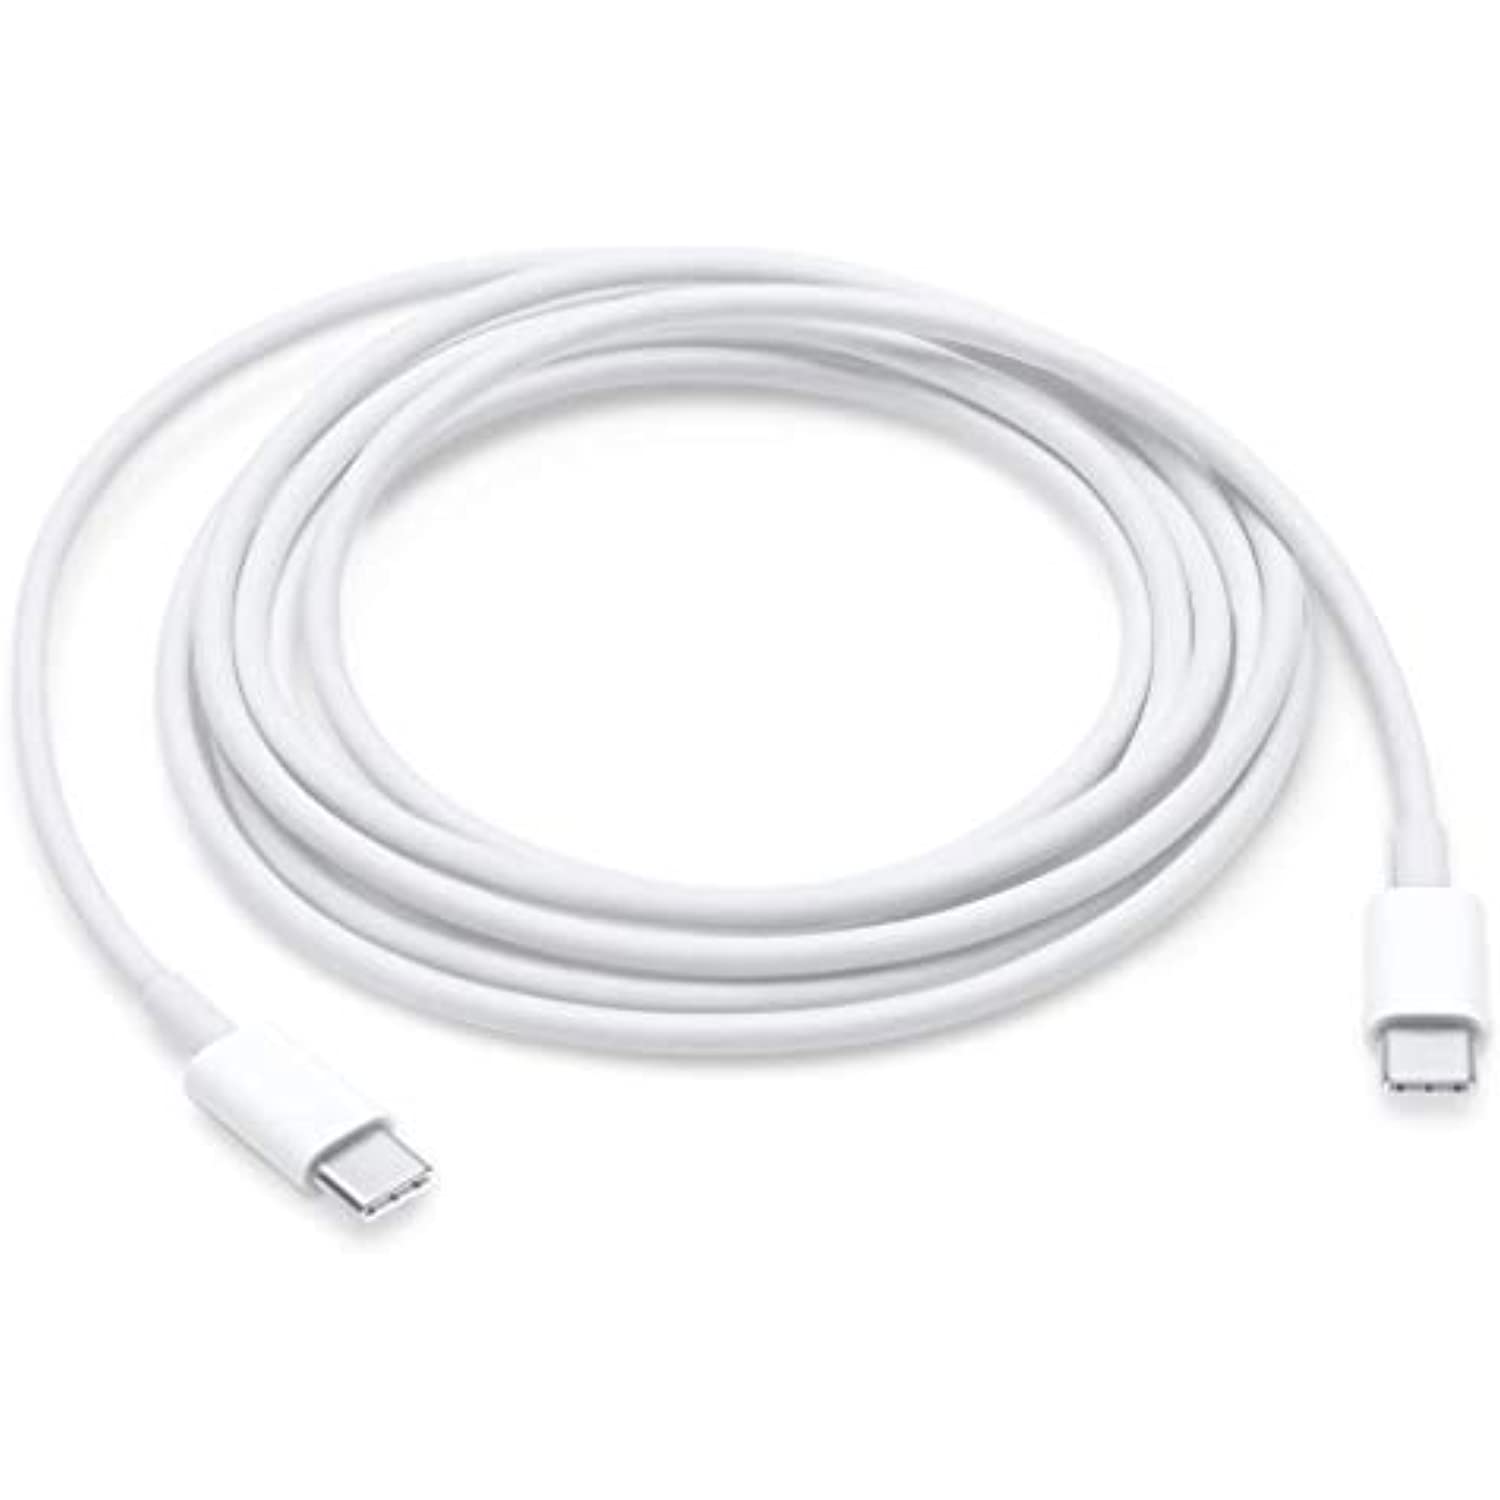 Anker PowerLine III Flow USB-C to Lightning Cable 6-ft Black A8663011 -  Best Buy